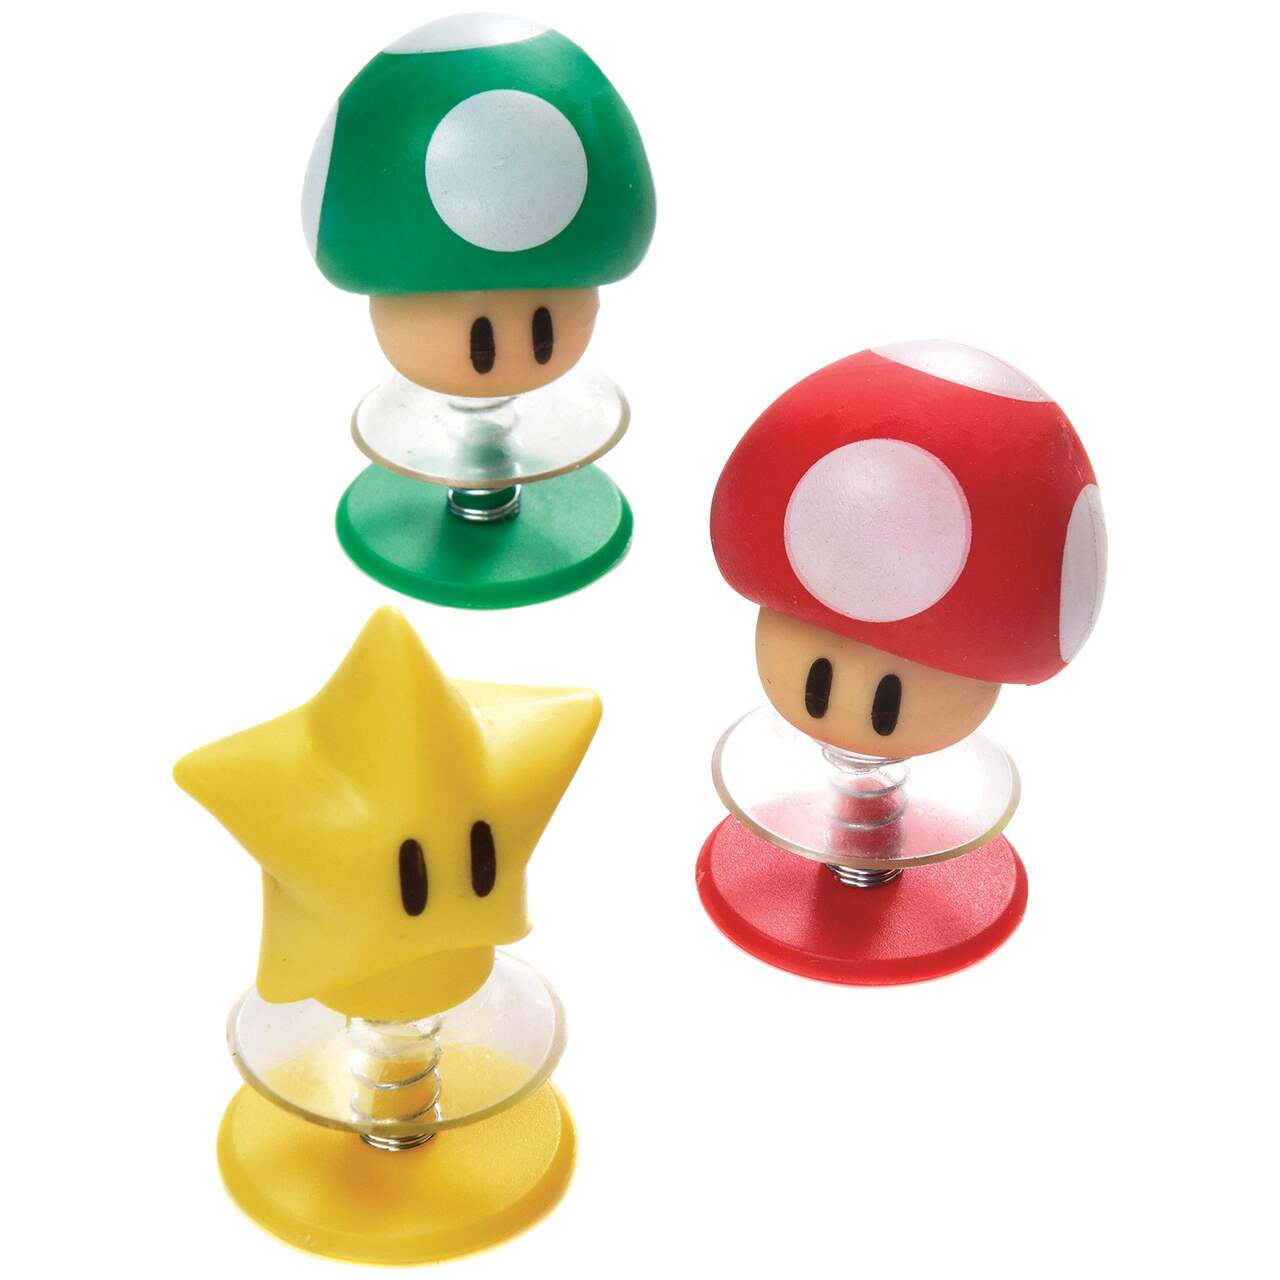 Super Mario Spring-Loaded Pop-Ups, Red/Yellow/Green, 6-pk